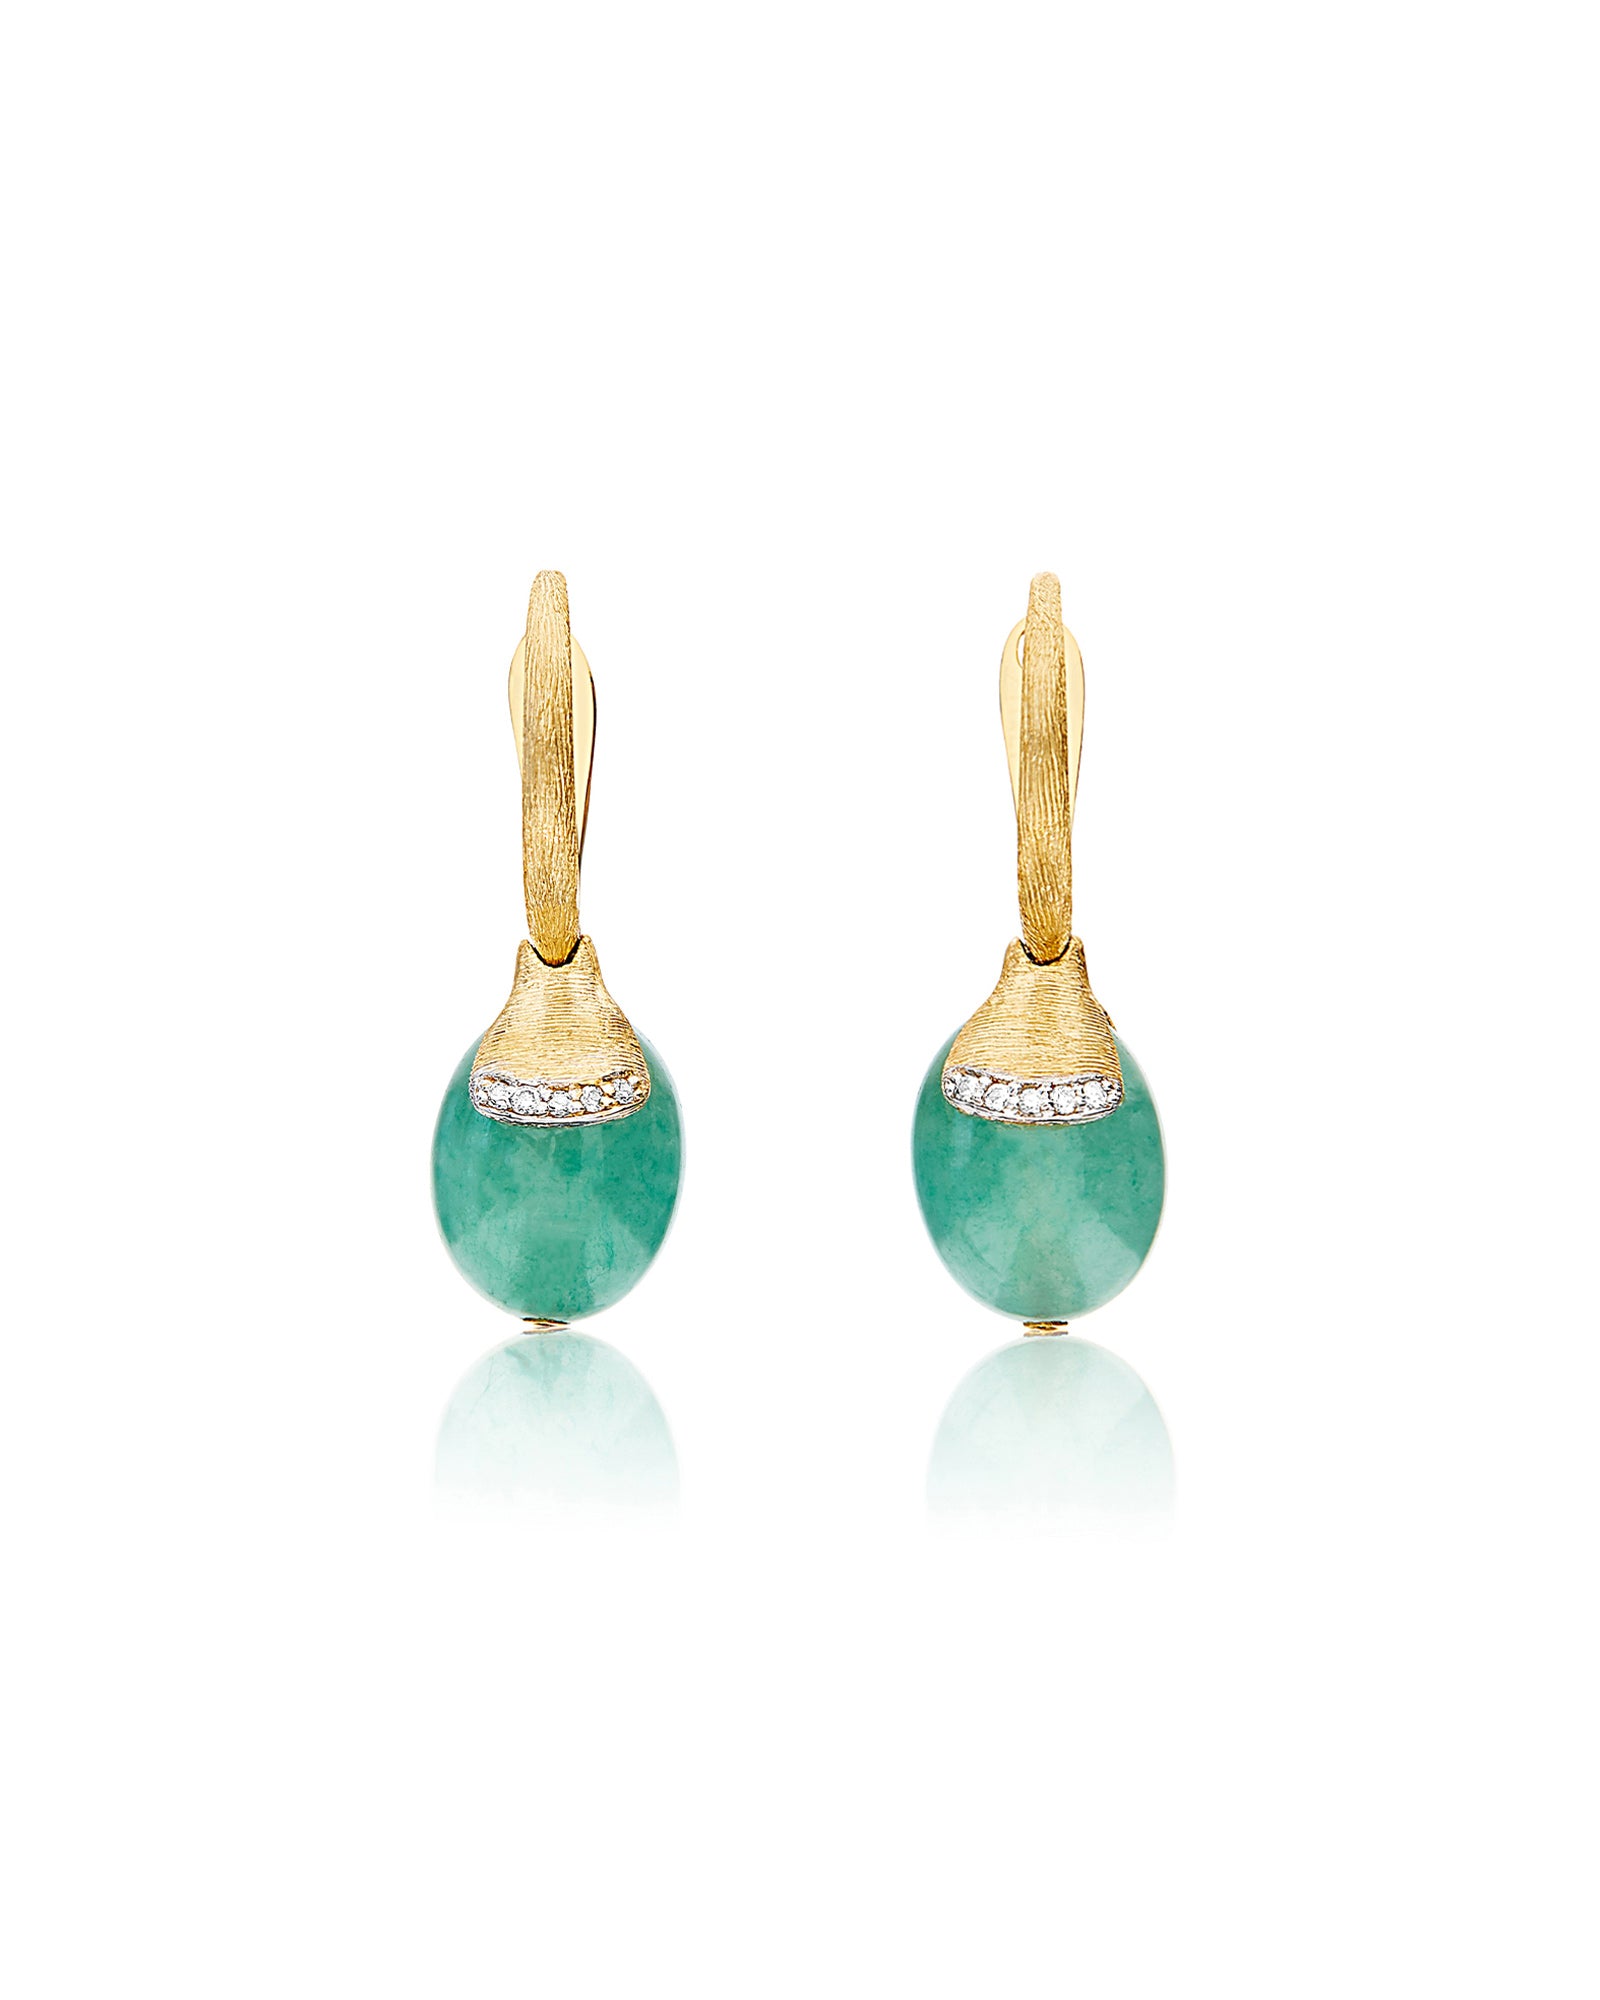 Amazonia "Amulets" Ciliegine Gold and Green Aventurine Ball Drop Earrings with Diamonds Details (SMALL)